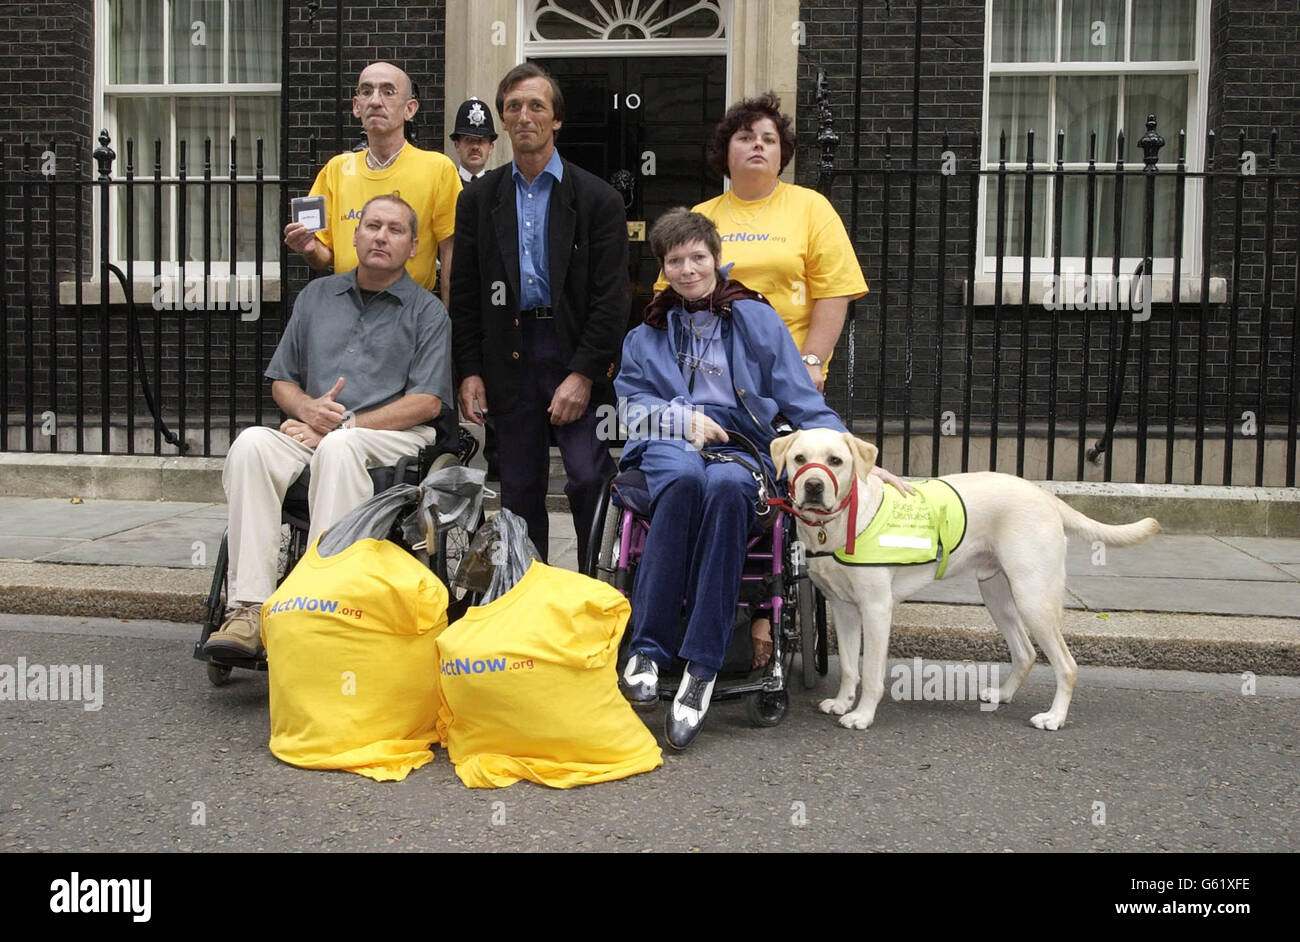 Brian Pretty (centre), the widower of 'right to die' campaigner Diane Pretty, stands outside 10 Downing Street, with four terminally ill people (clockwise from top left - Steve Barksly from Manchester who has AIDS. * Lisa Cook from Huddersfield who suffers from Huntingdons disease, Jane McDonald, from London who has MS and teminal cancer and John Howard from Worthing, Sussex who suffers from motor neurone disease) after delivering the largest on-line petition ever received by the PM's office. The petition organised by Act Now, was signed by 50,000 people with terminal illness, calling for a Stock Photo